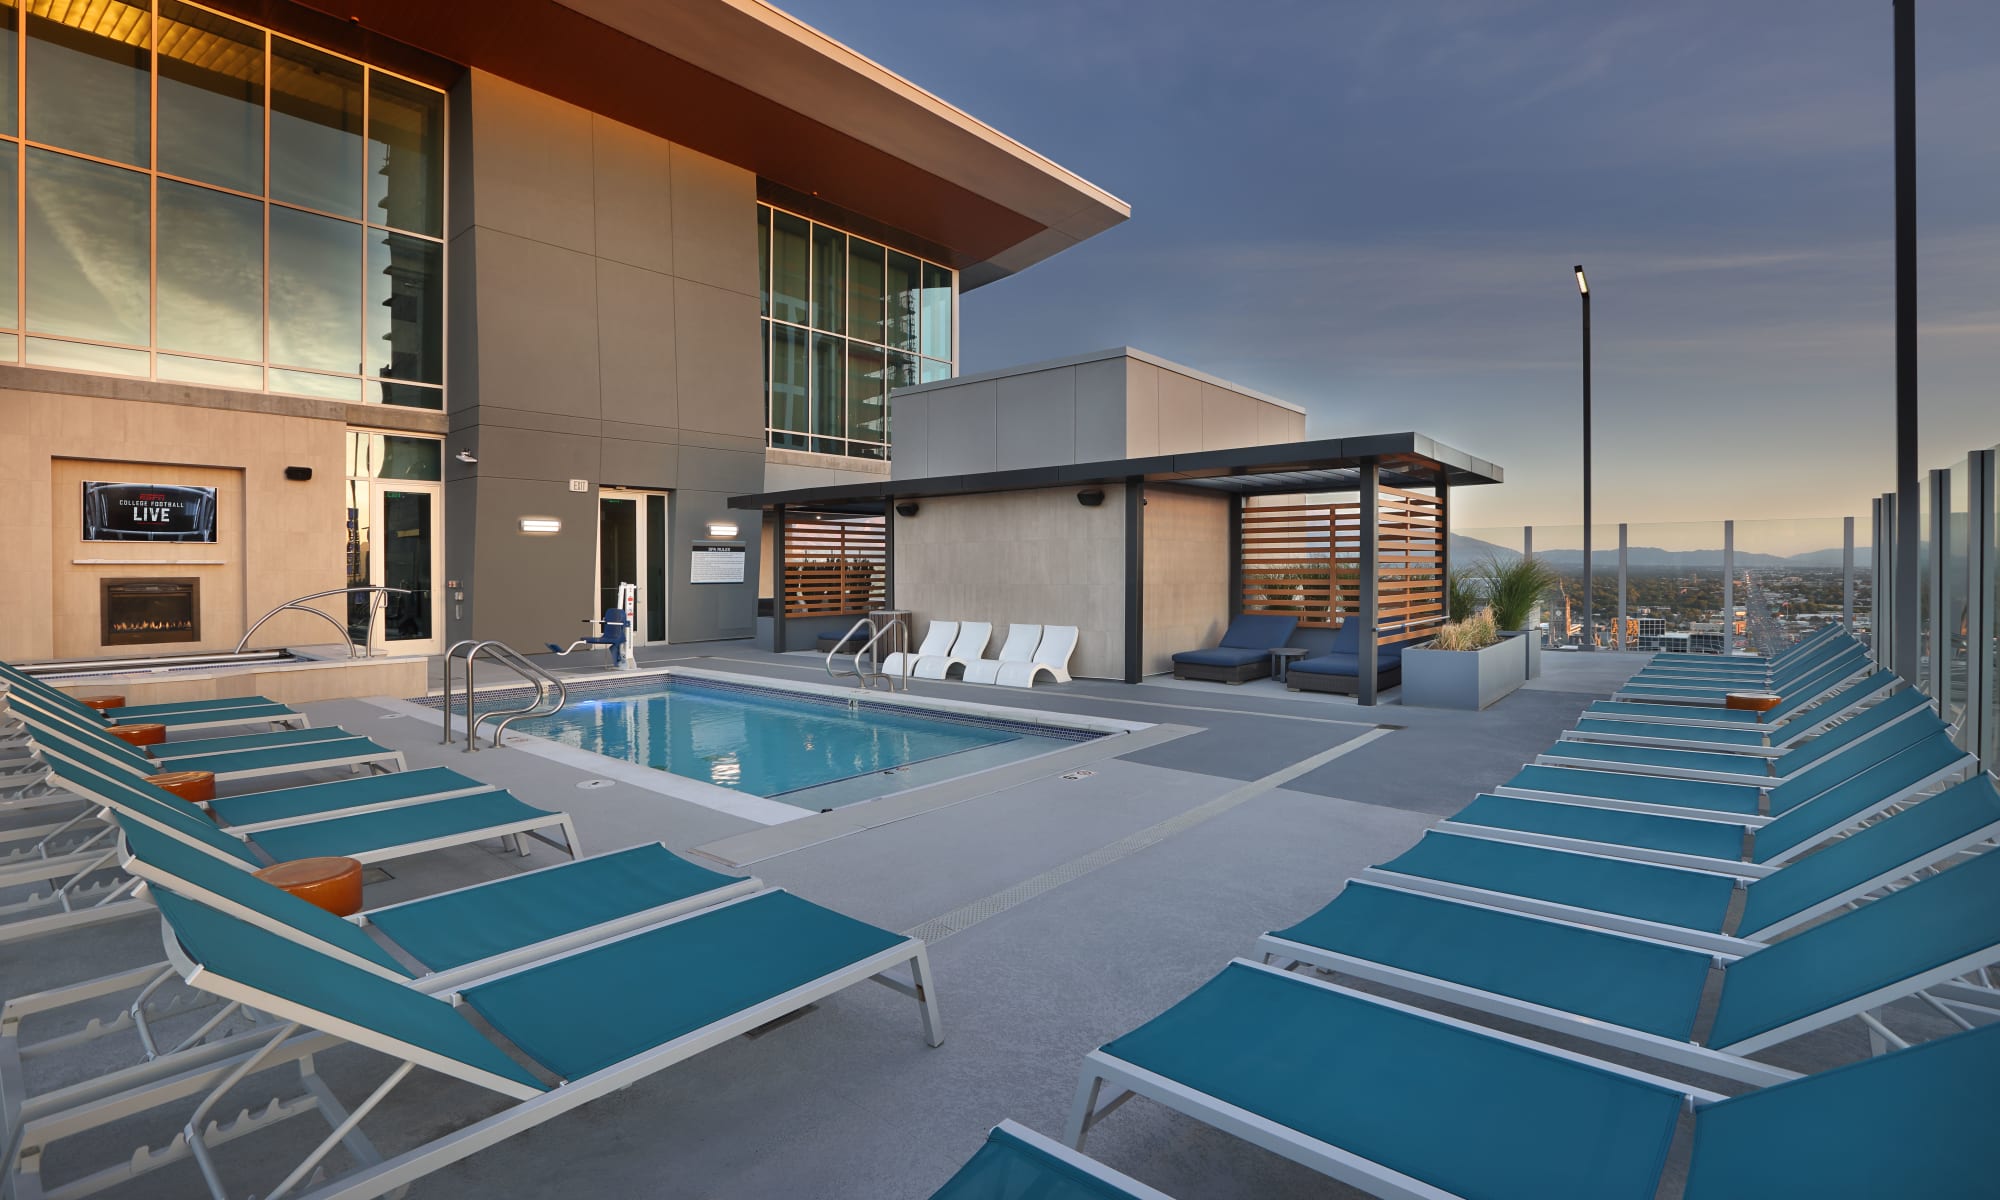 21st floor pool at sunset surrounded by teal lounge chairs at Luxury high-rise community of Liberty SKY in Salt Lake City, Utah